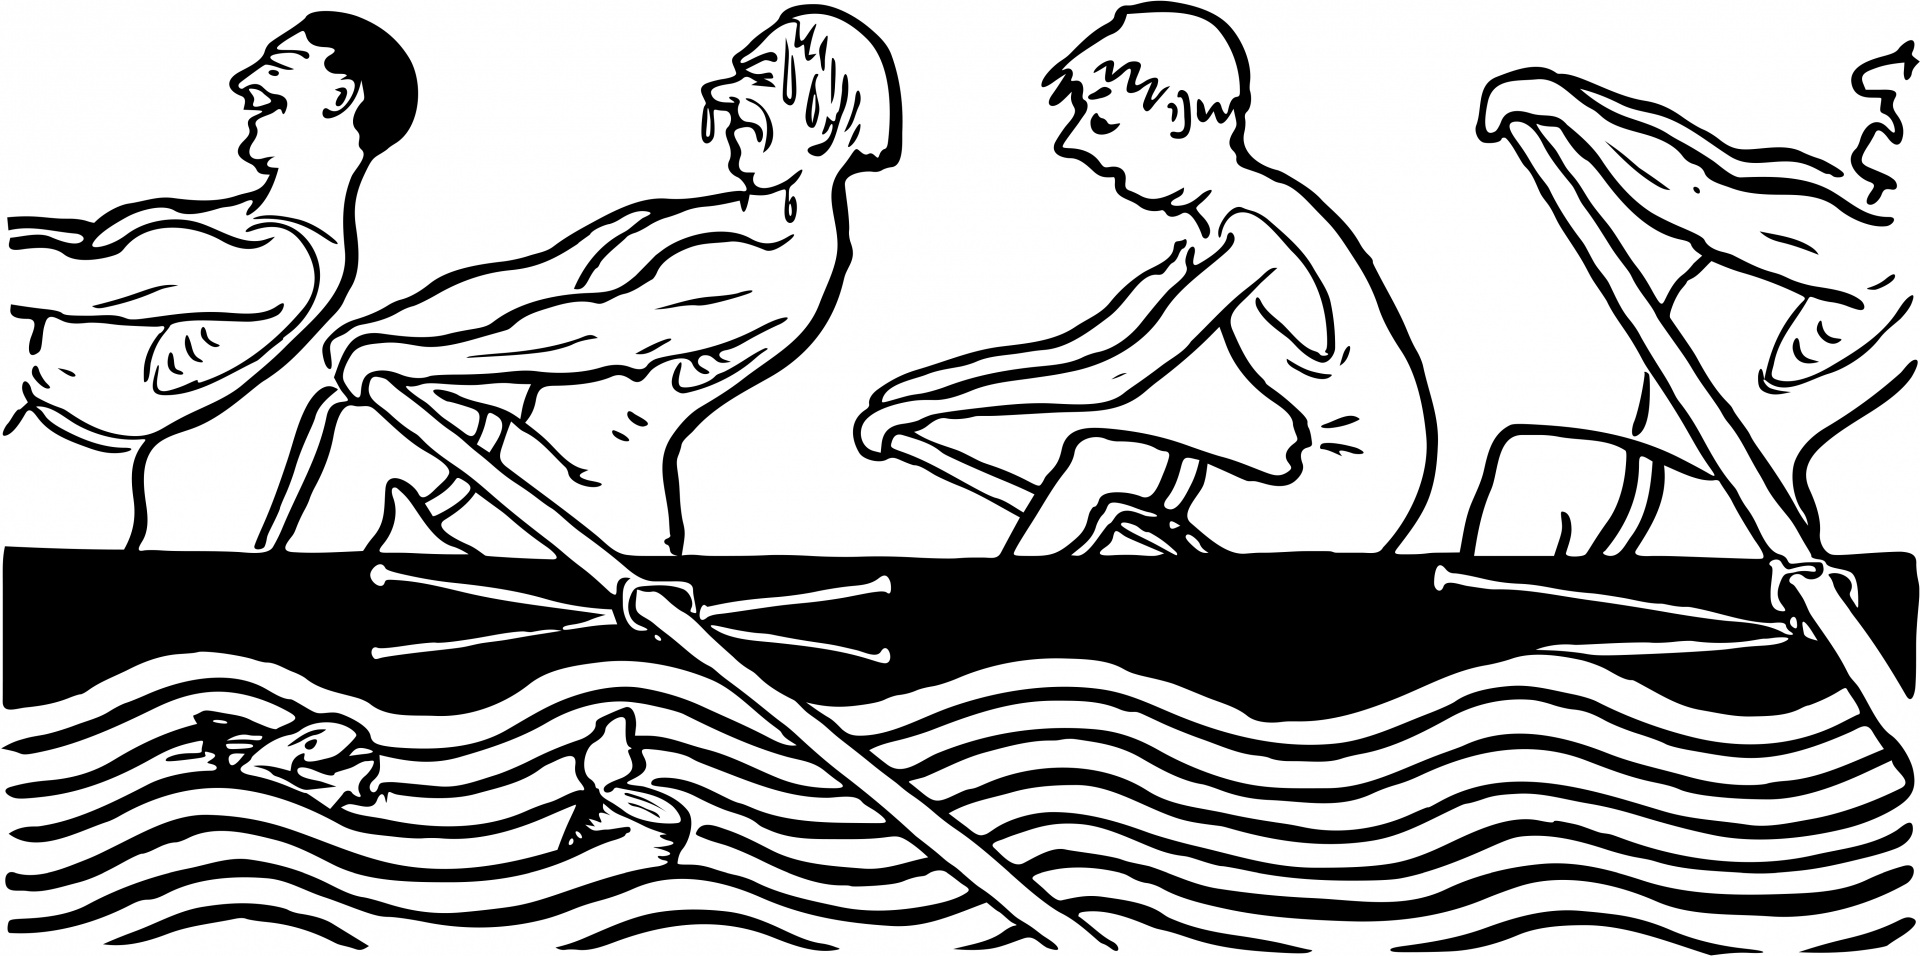 Gig Rowers: Re digitized vintage public domain illustration of a black and white men rowing a boat.